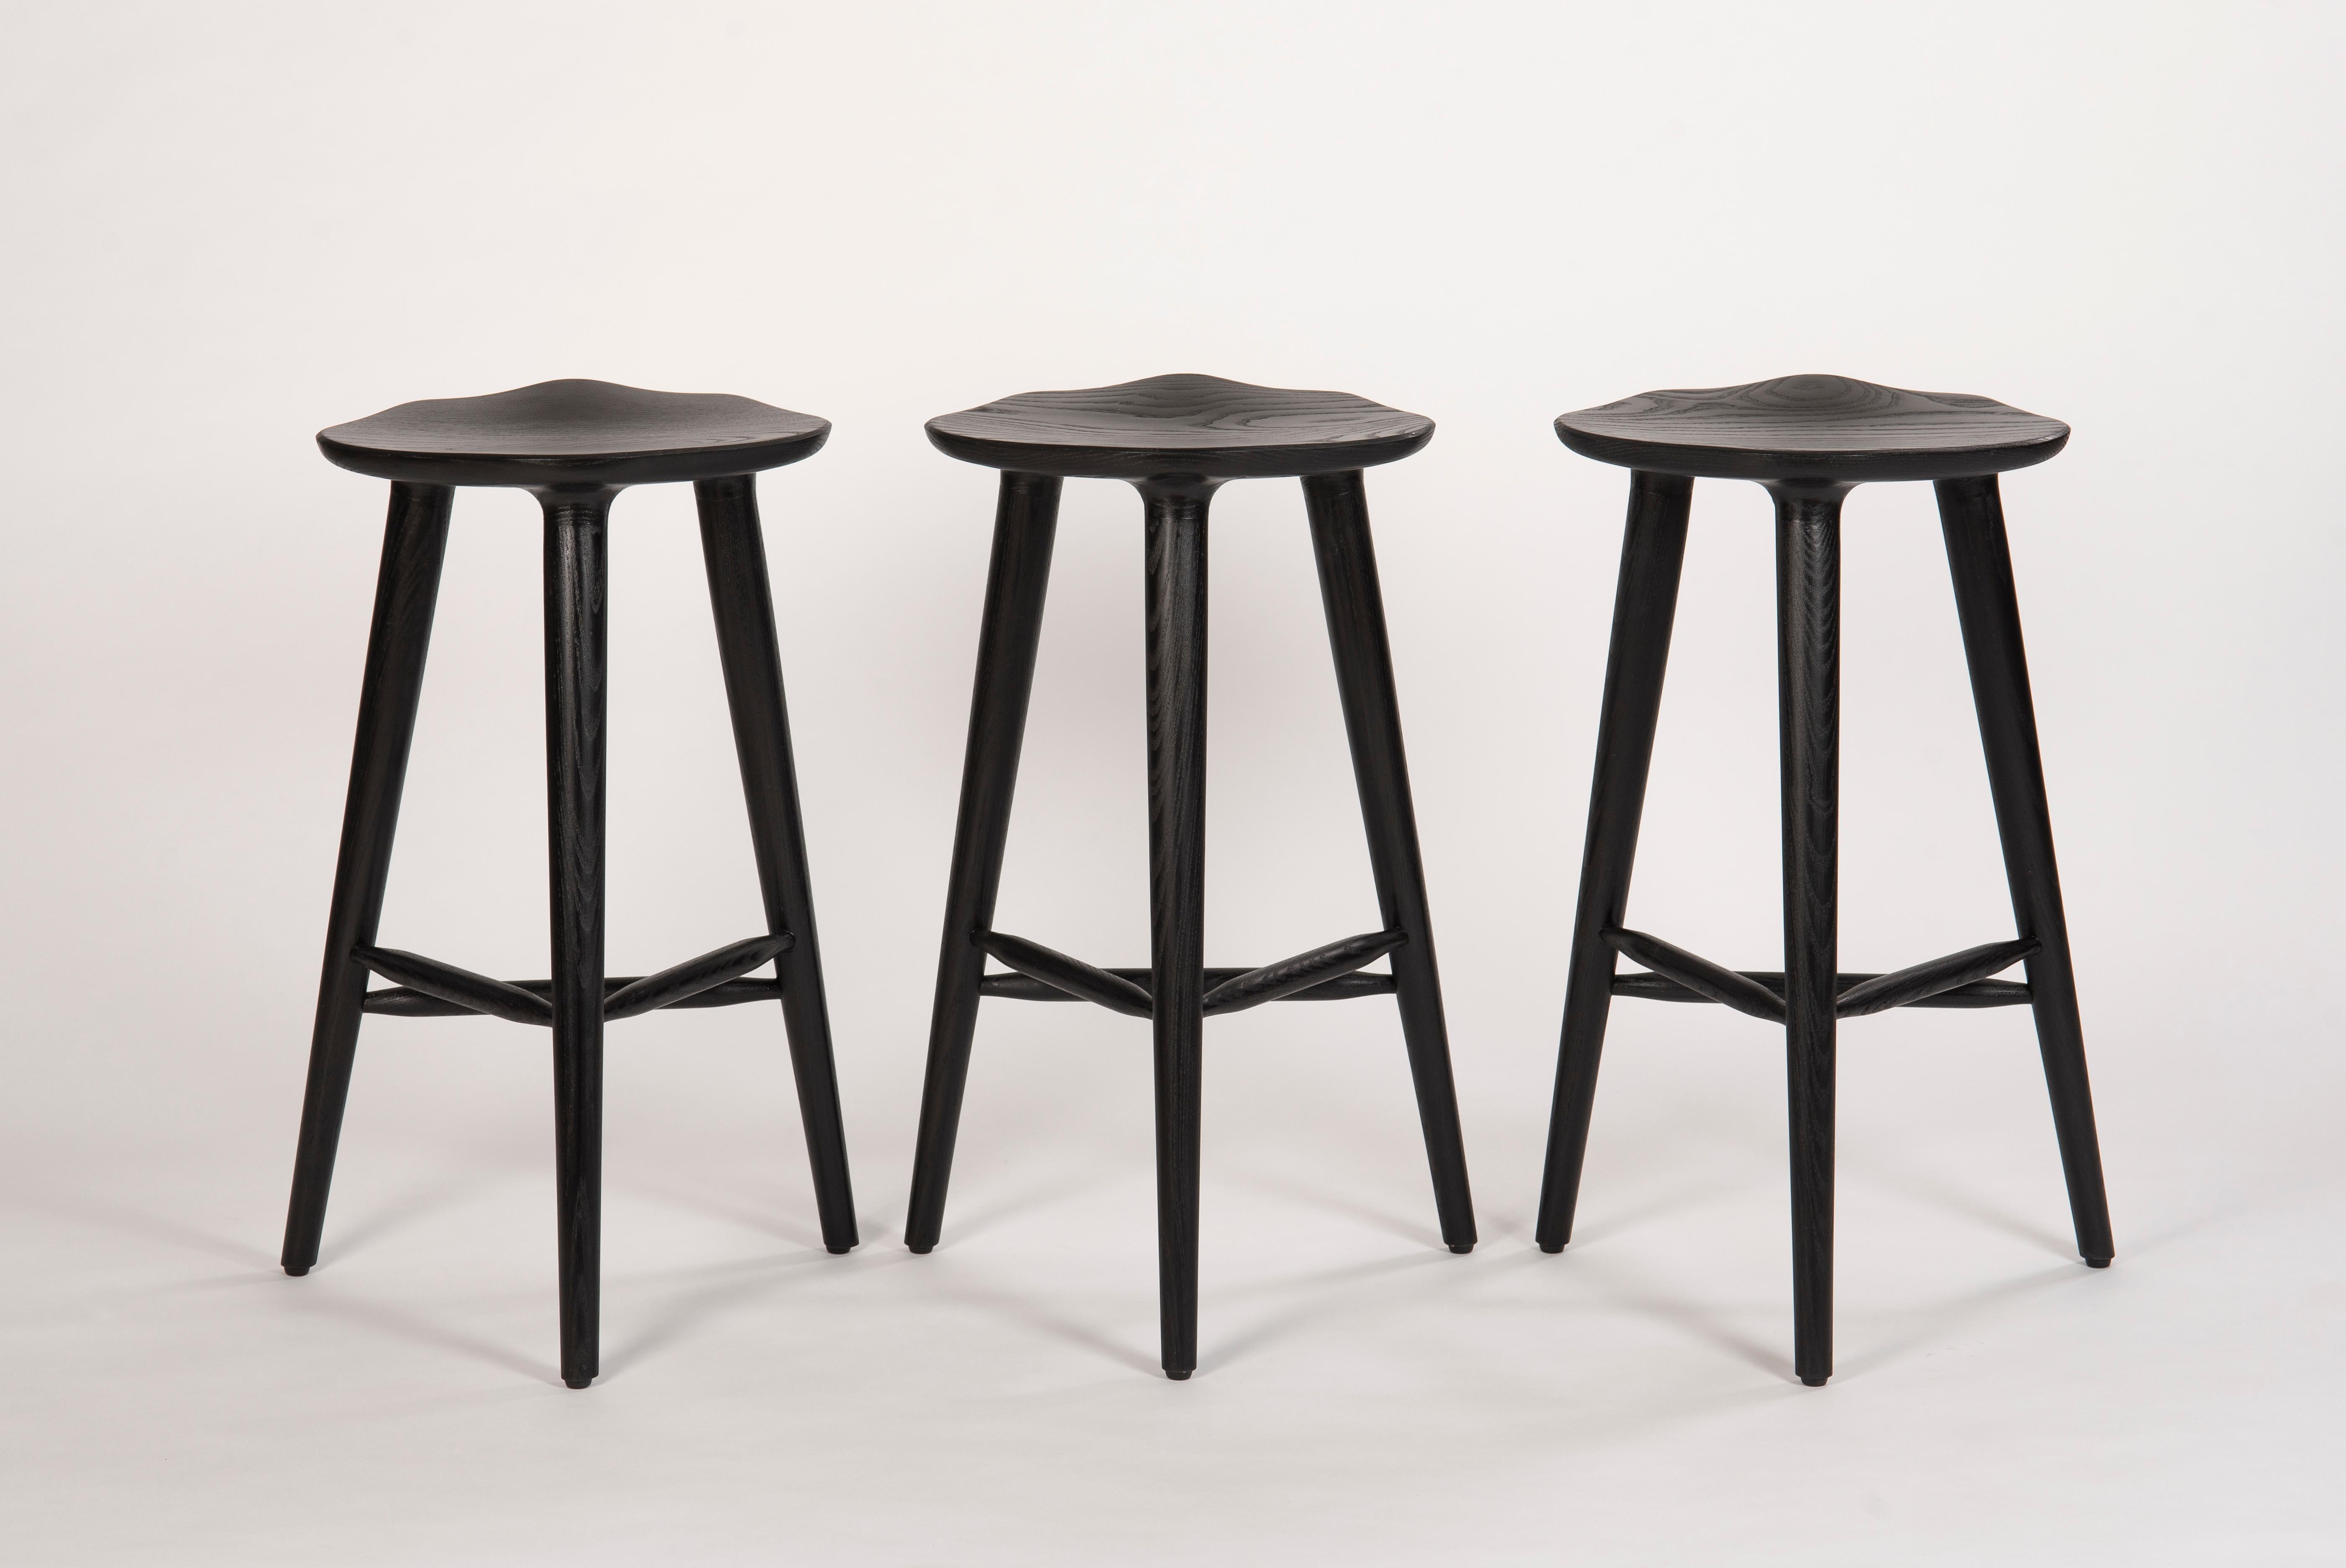 Descendants of an extraordinary family, Tam stools are grown to 65 cm in height, multiplying in a garden of possibilities while preserving in their genetic makeup the beauty of ash wood. Its radiant design has become an icon in kitchens,